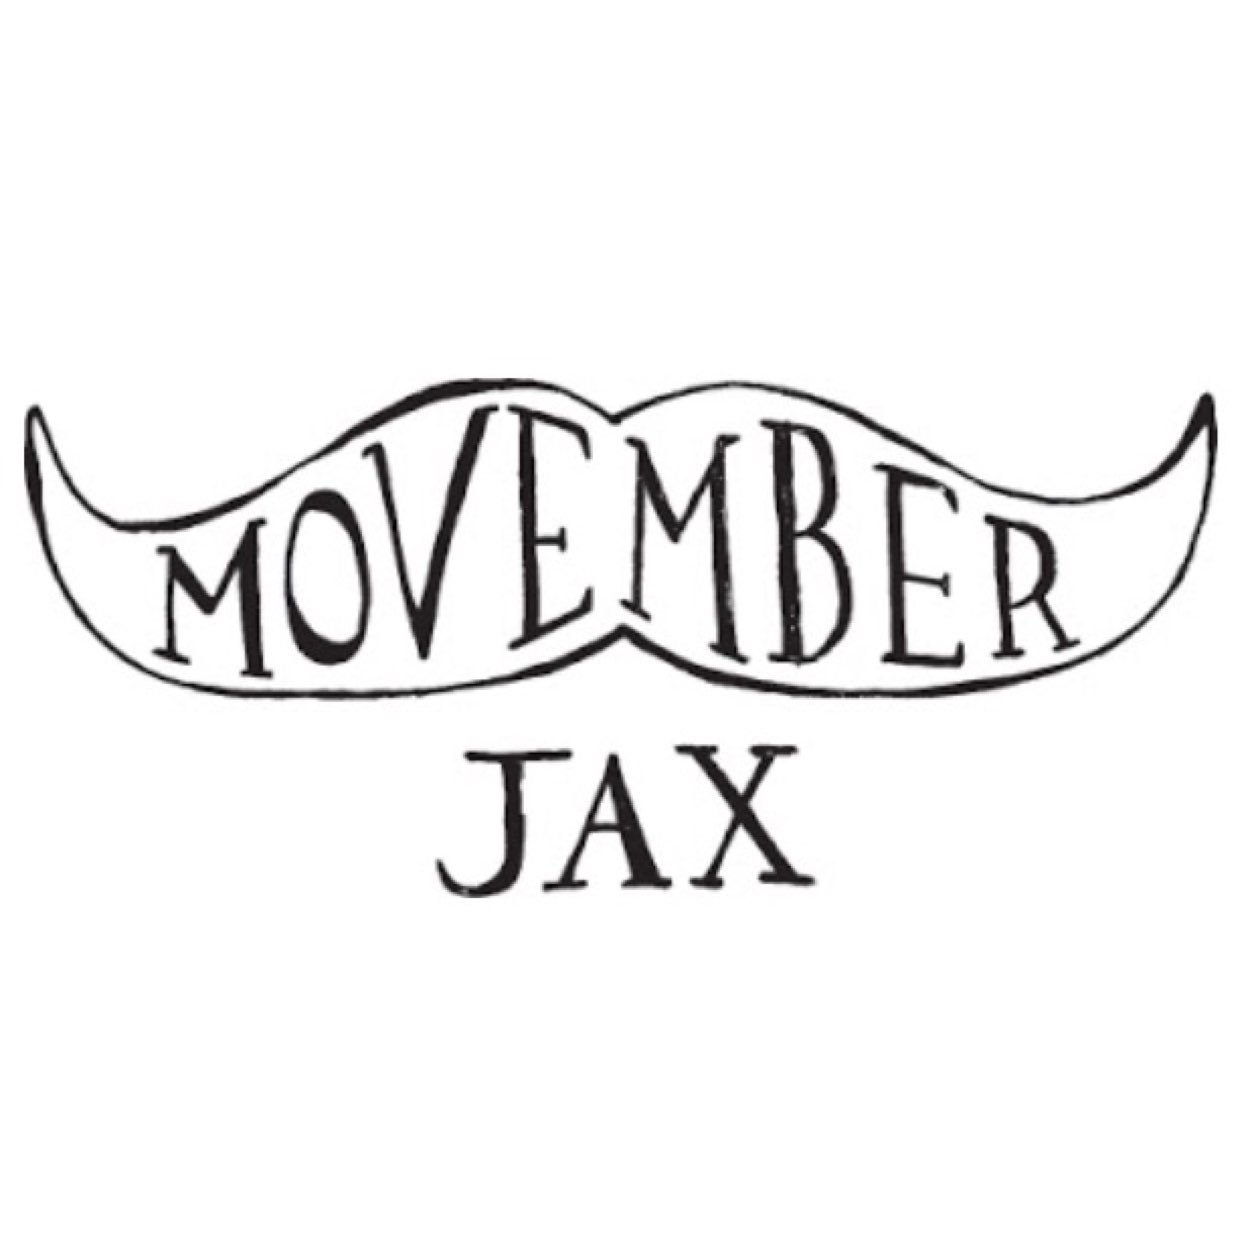 Movember Jax is changing the Face of Men's Health.